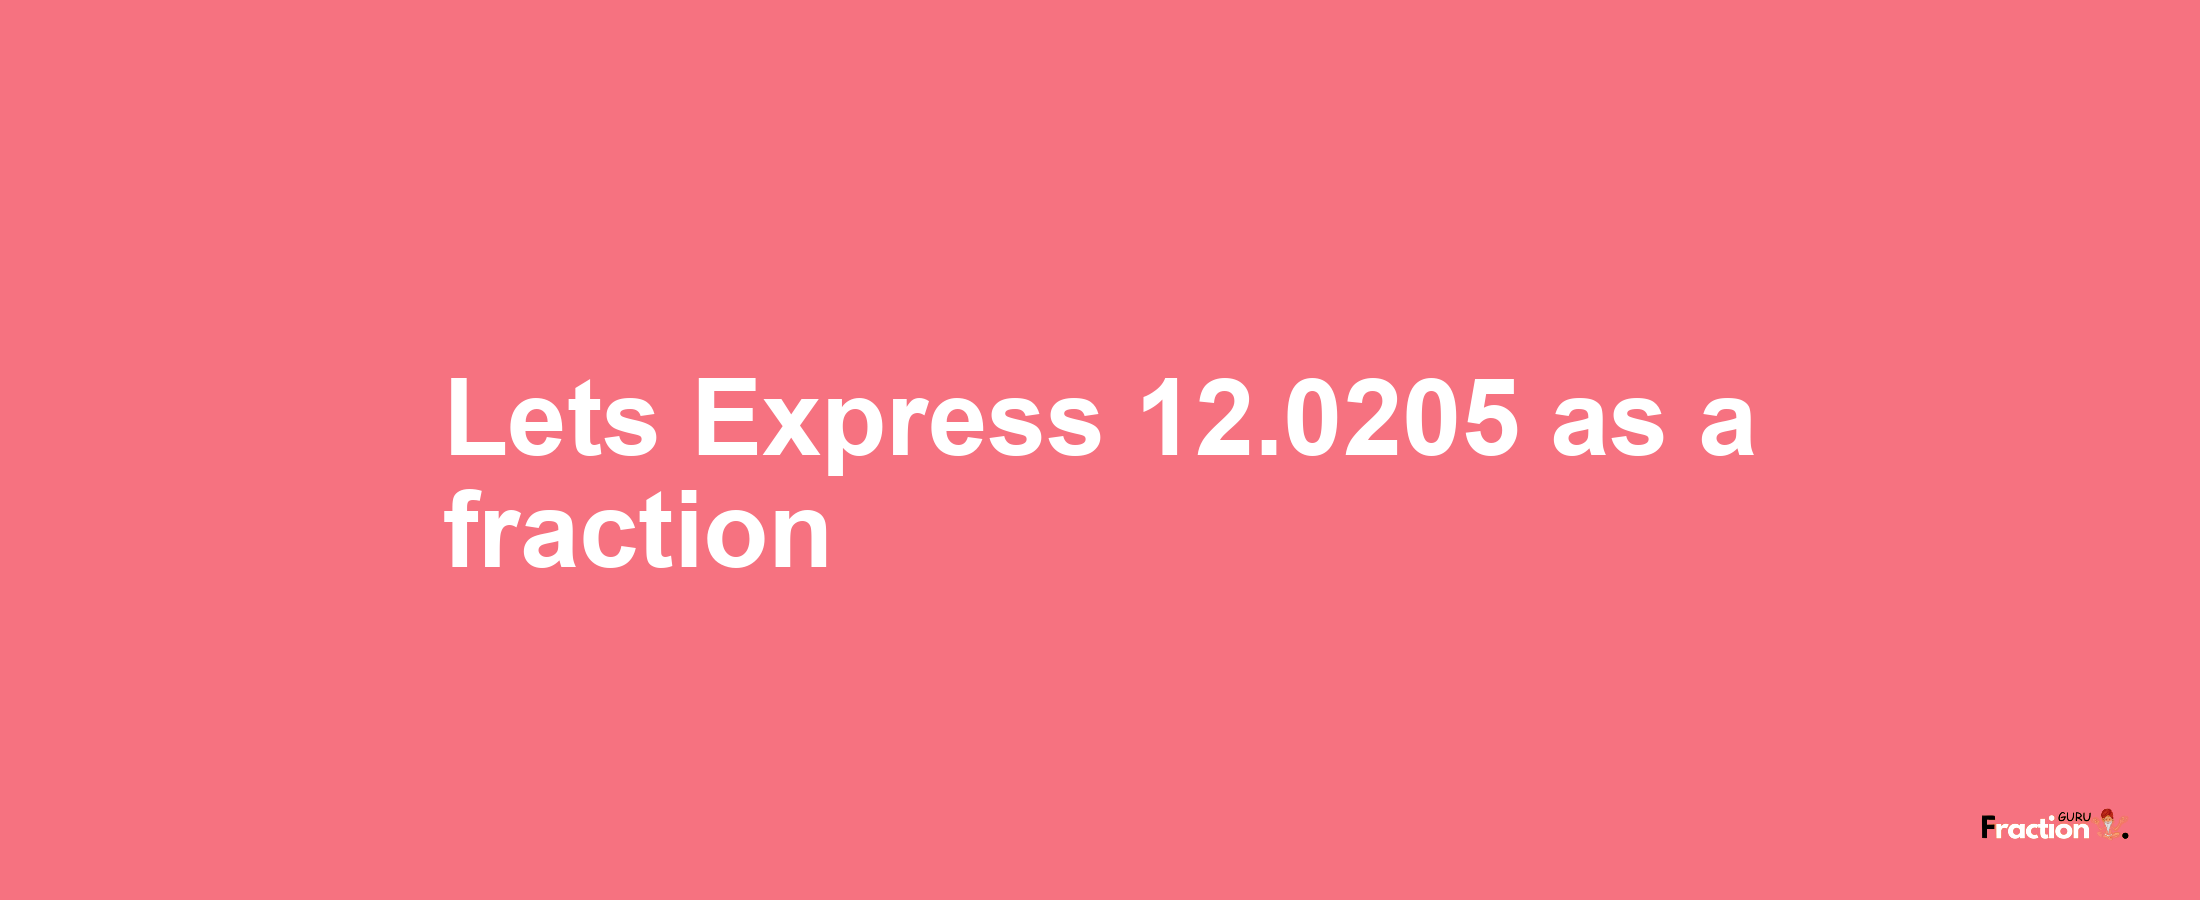 Lets Express 12.0205 as afraction